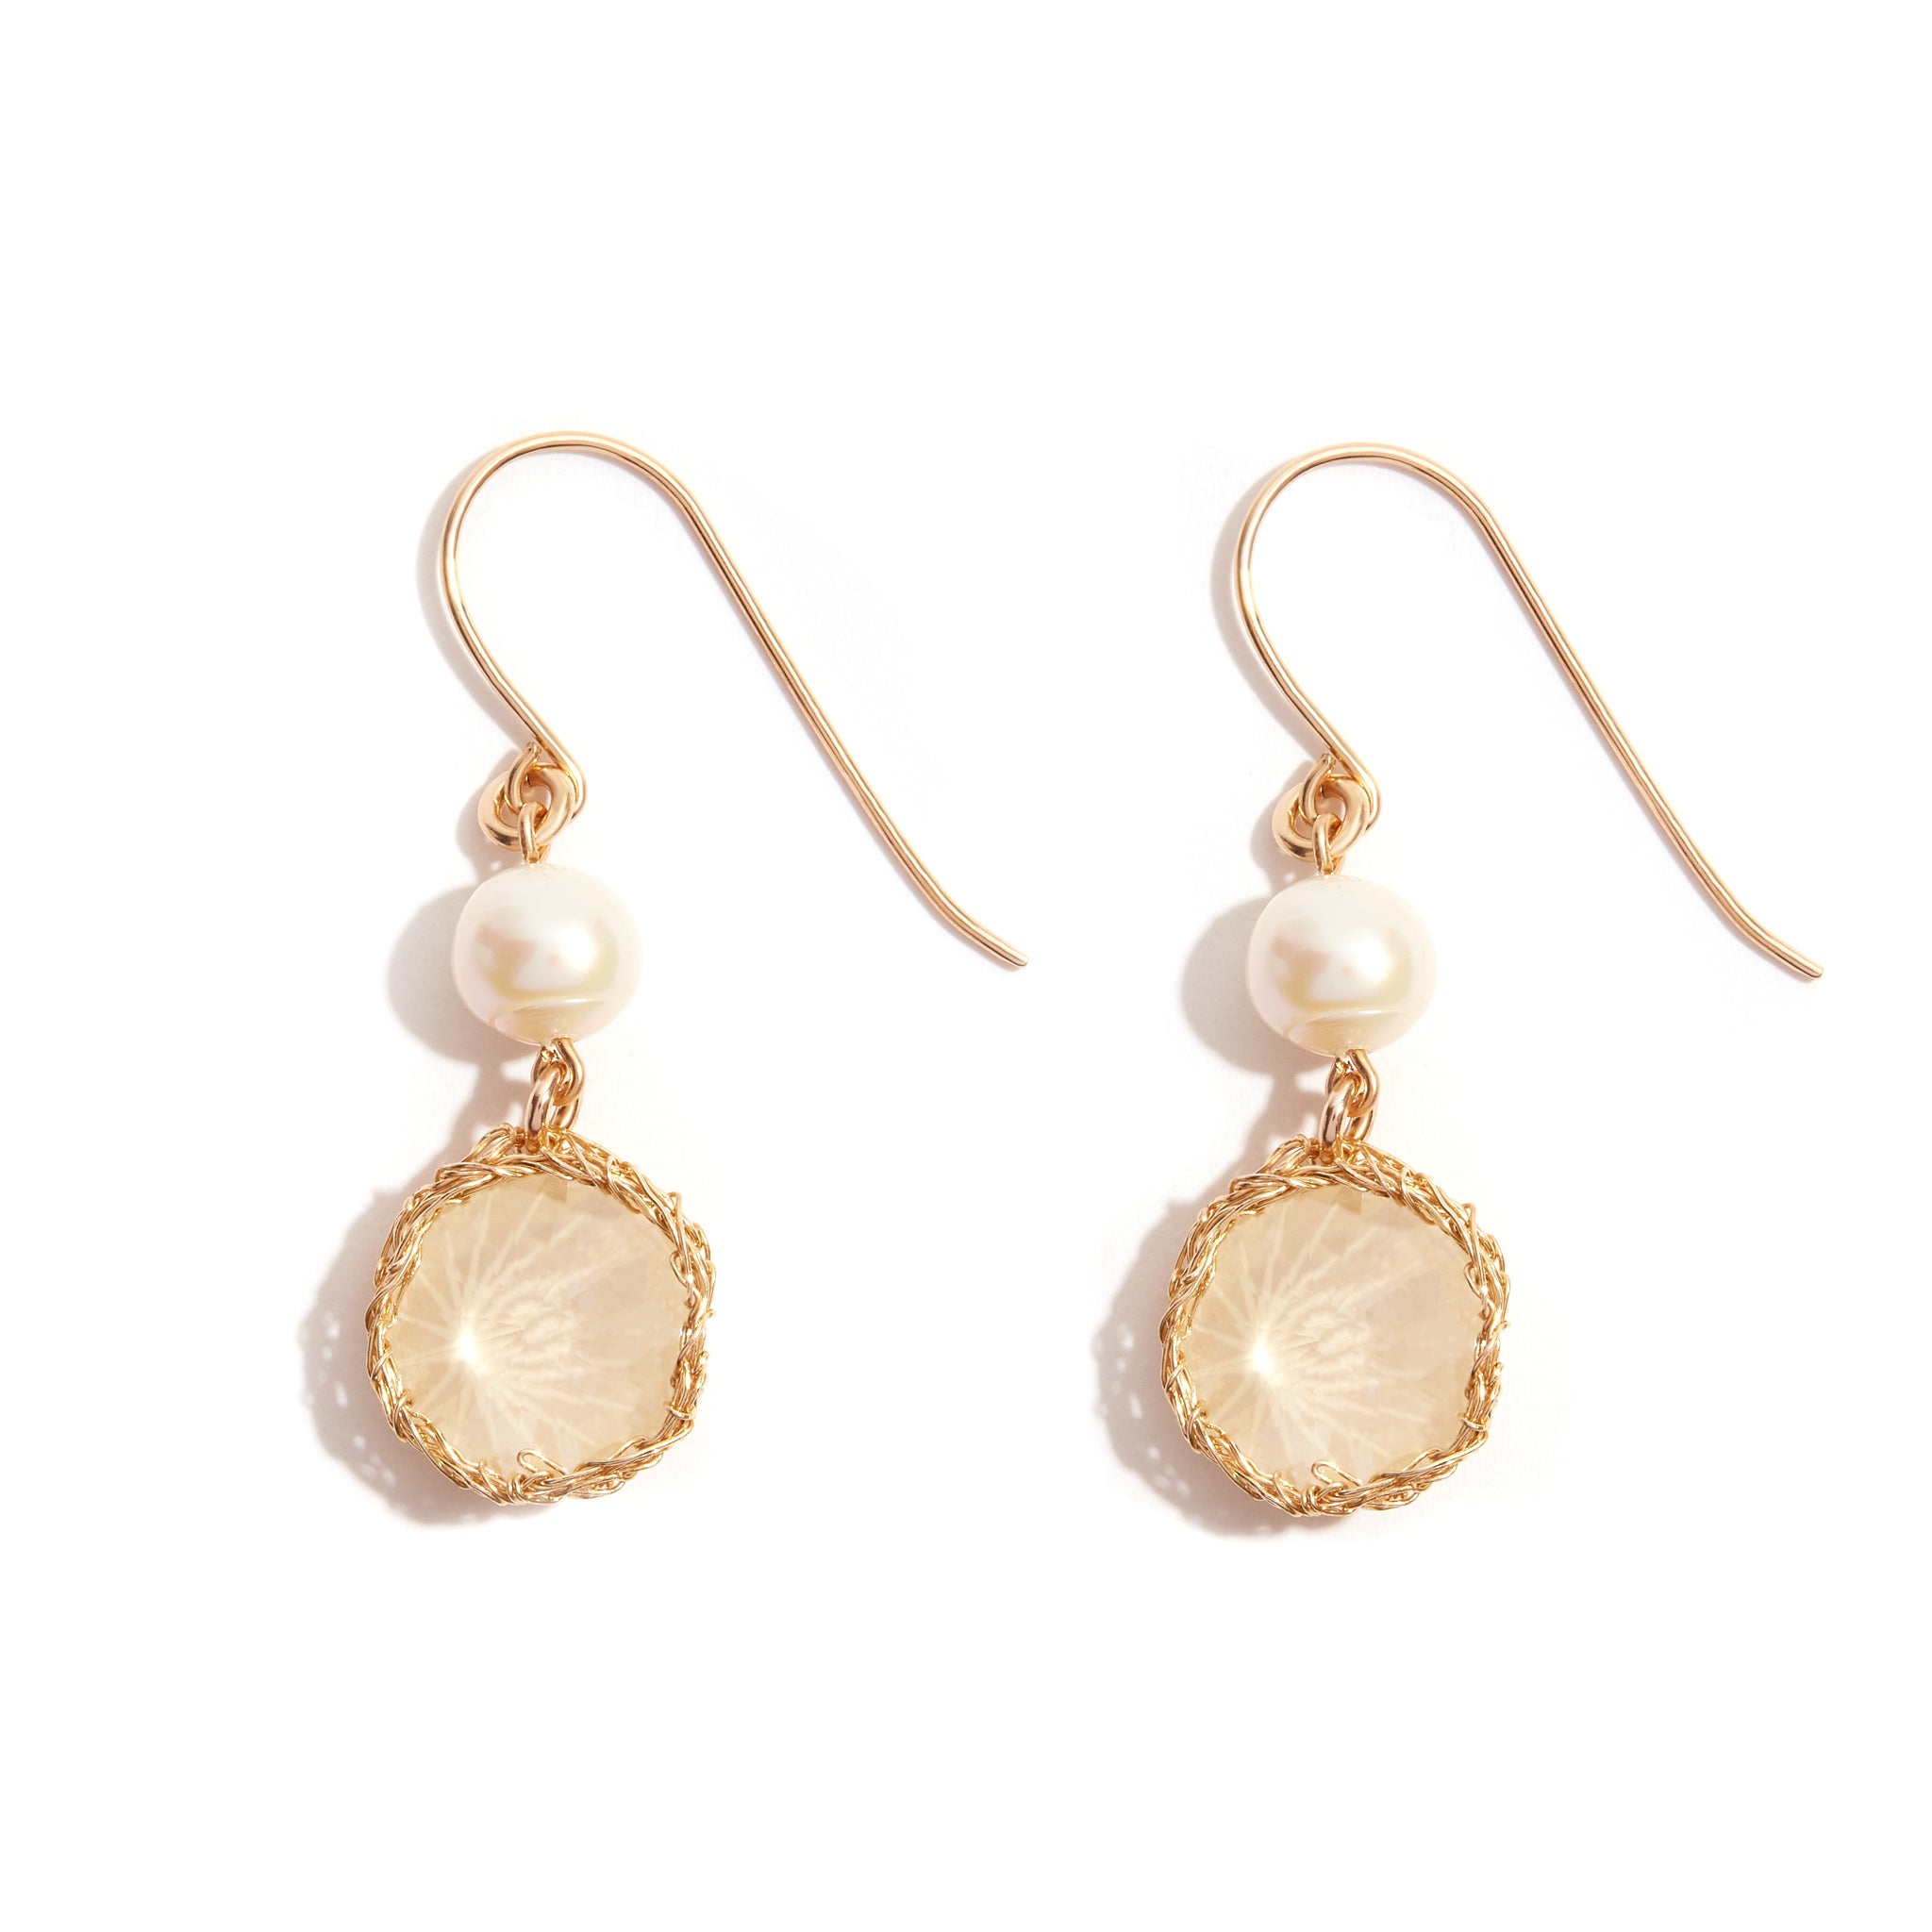 Serenity Opal Drop Earring crafted in 14ct gold-filled crochet, featuring a luminous pearl paired with a delicate sand opal stone. Radiate elegance and sophistication with this exquisite combination, perfect for any occasion